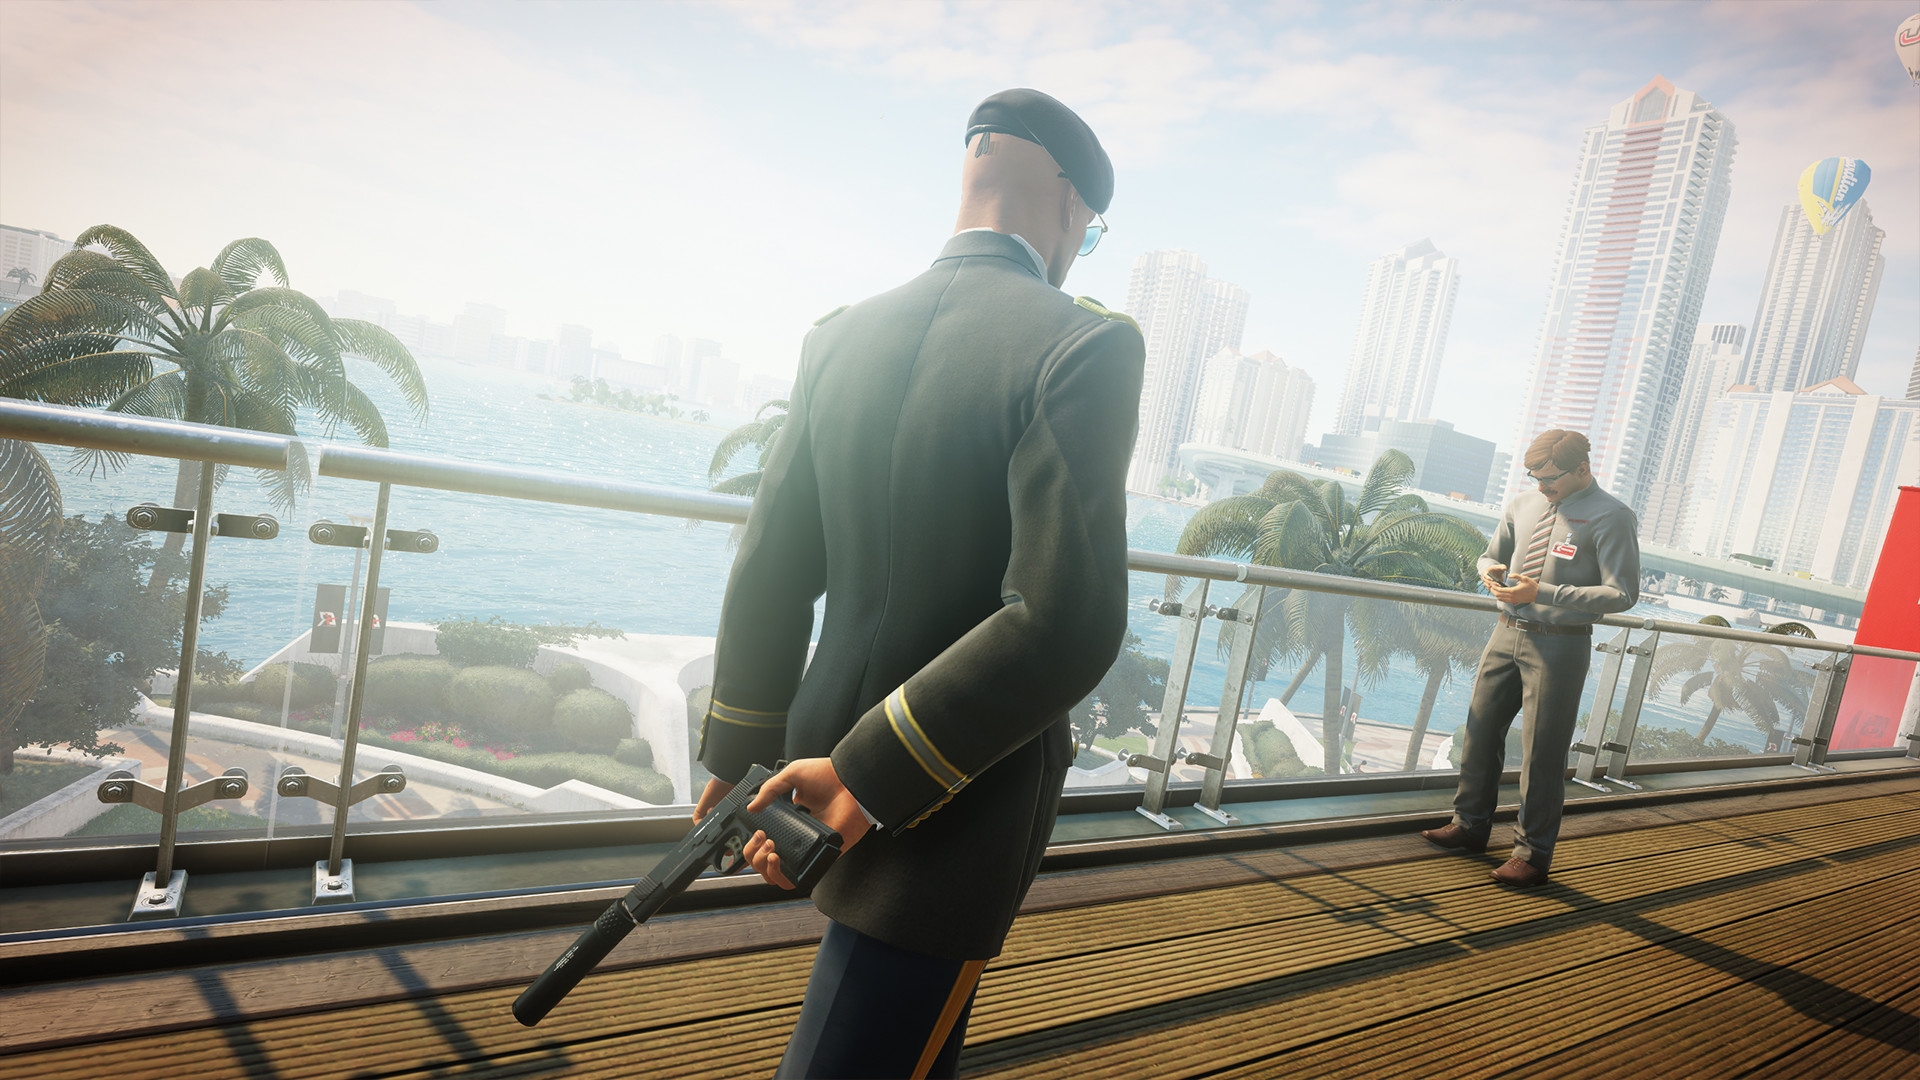 How good of a master assassin are you? Check out Hitman 2 today